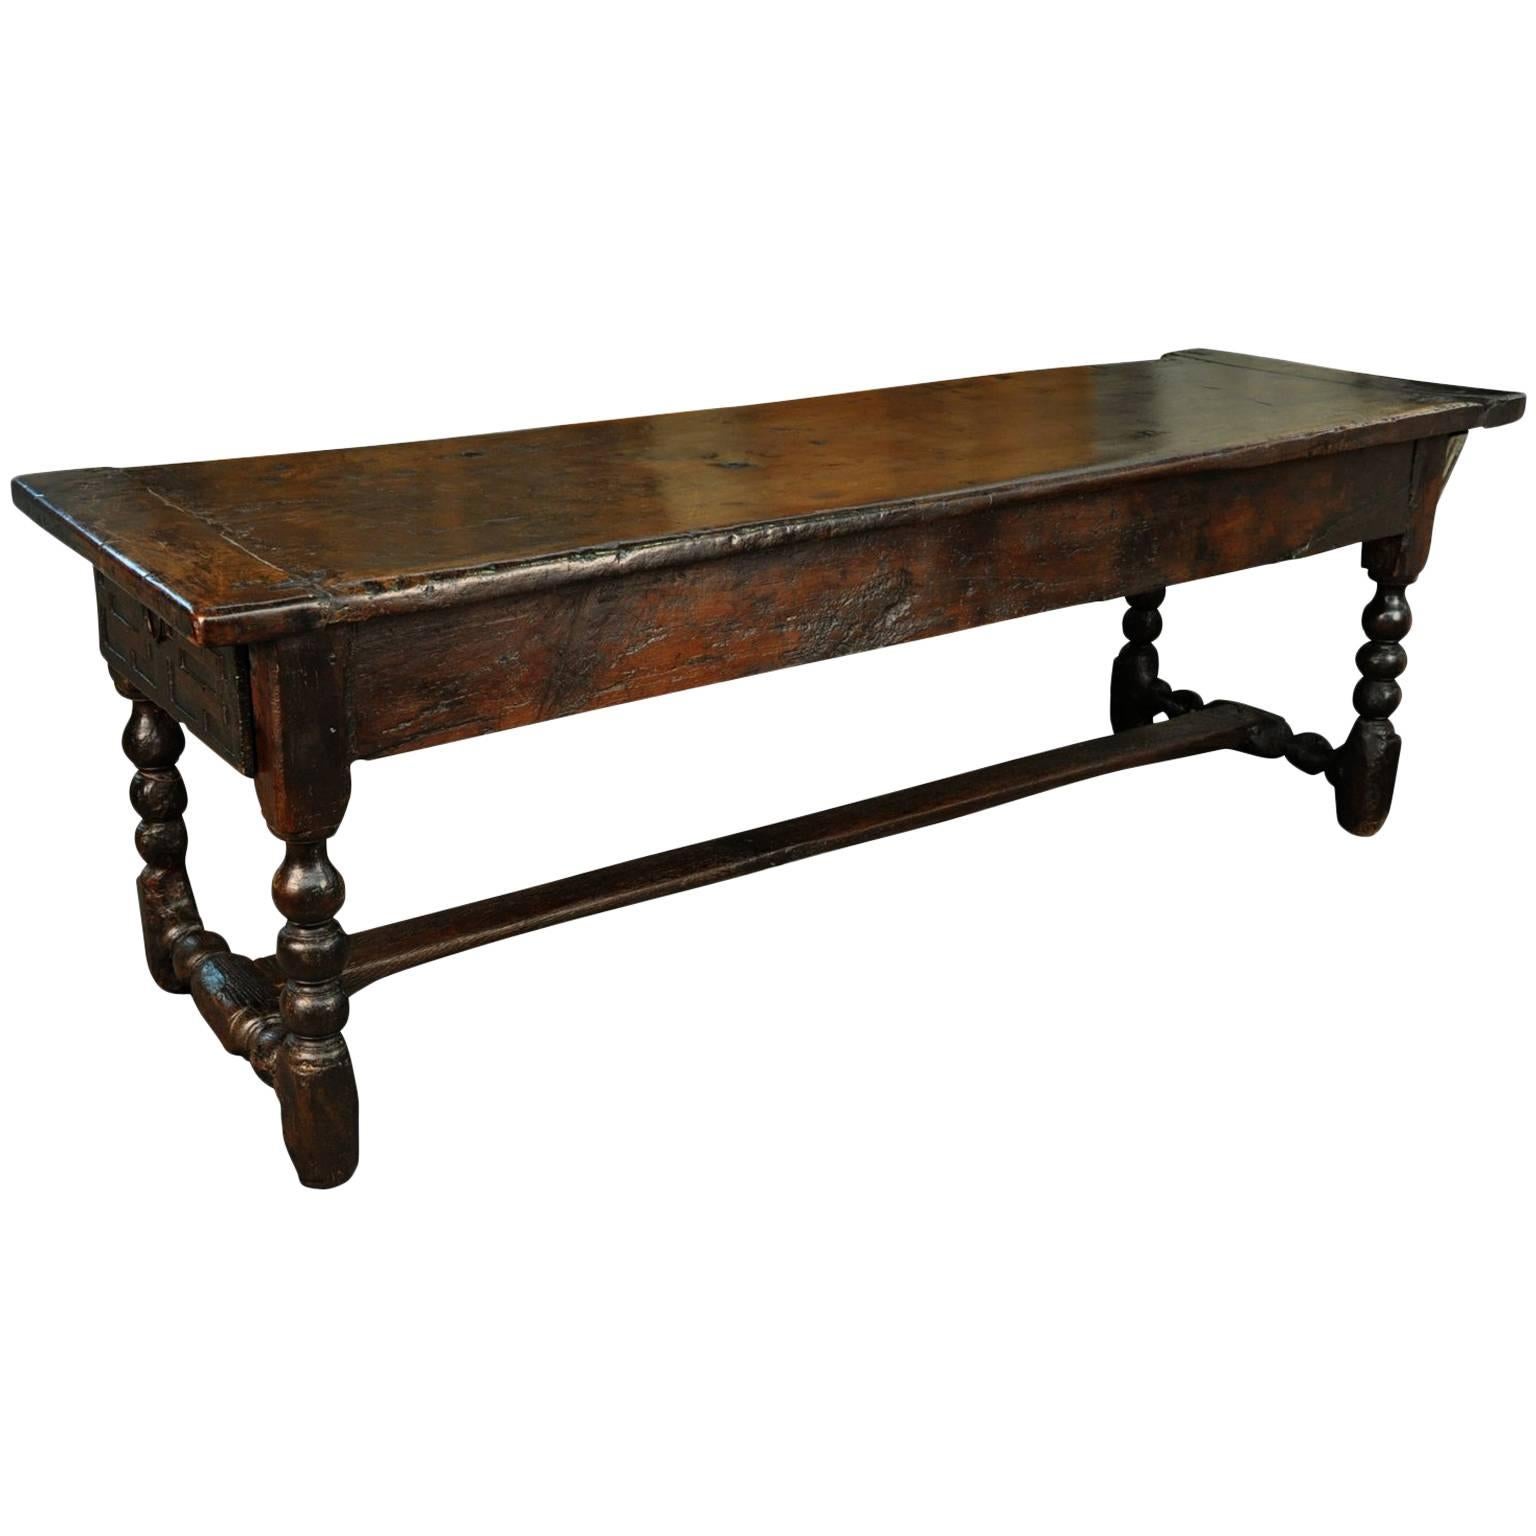 Outstanding 18th Century Spanish Console